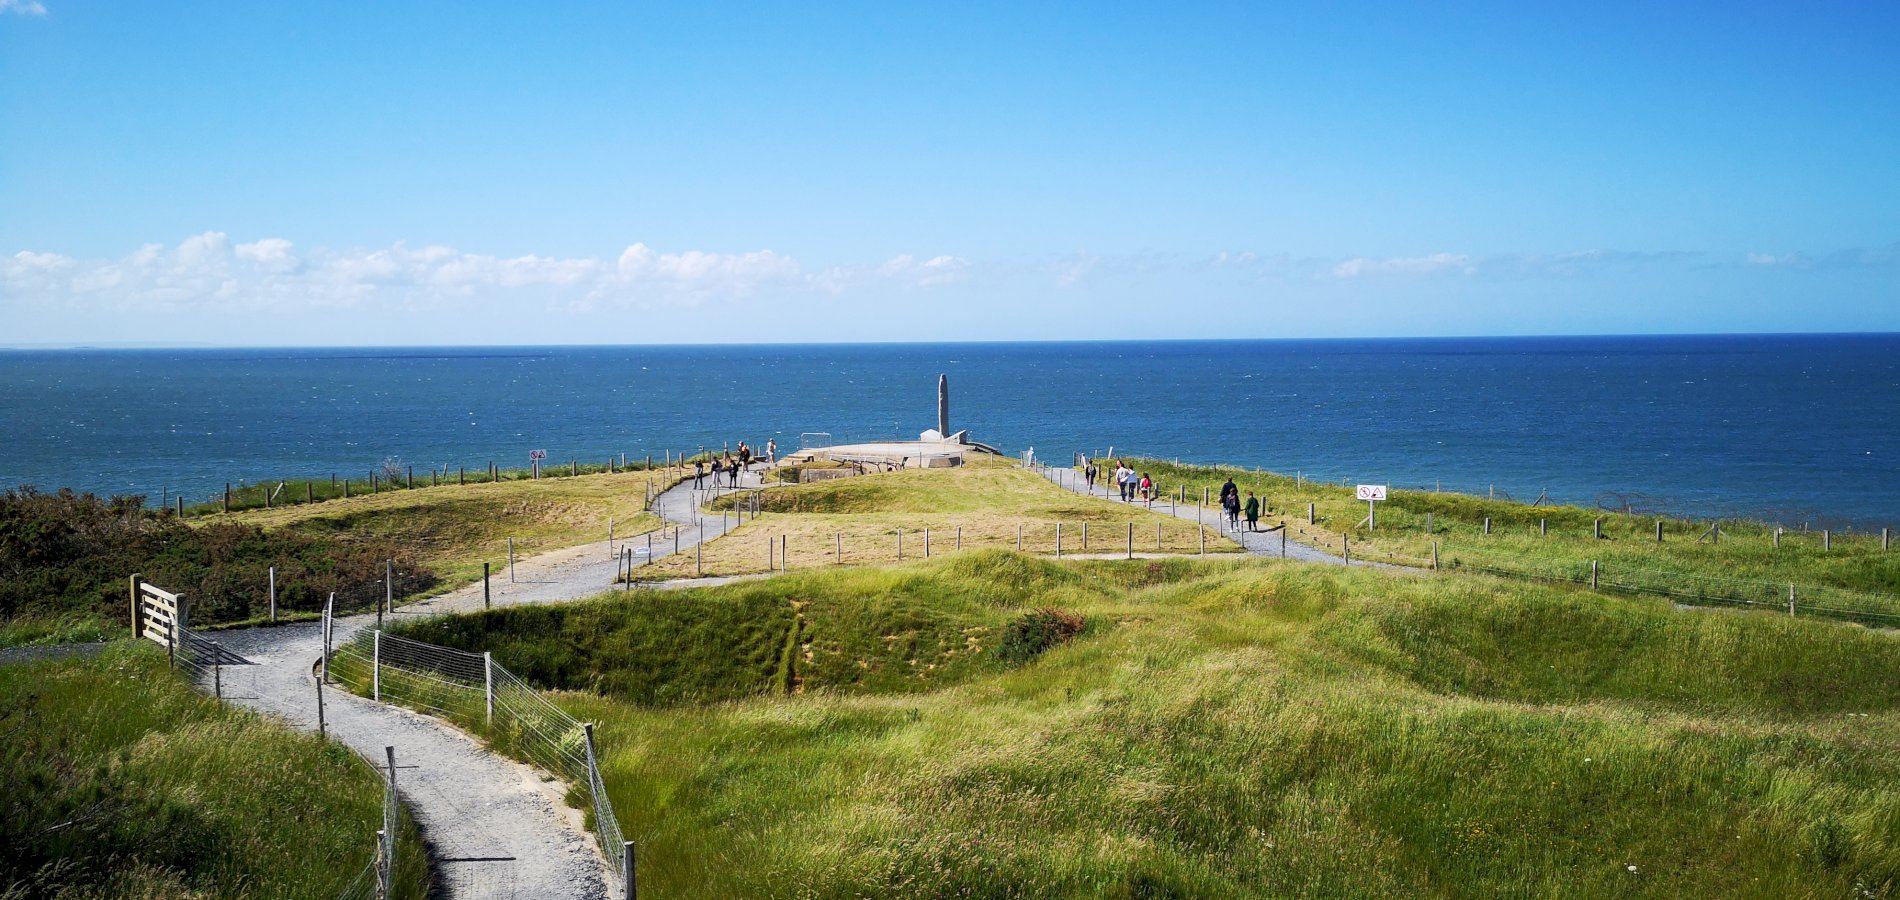 Ophorus Tours - Helicopter Tour from Paris to Normandy D-Day landing beaches